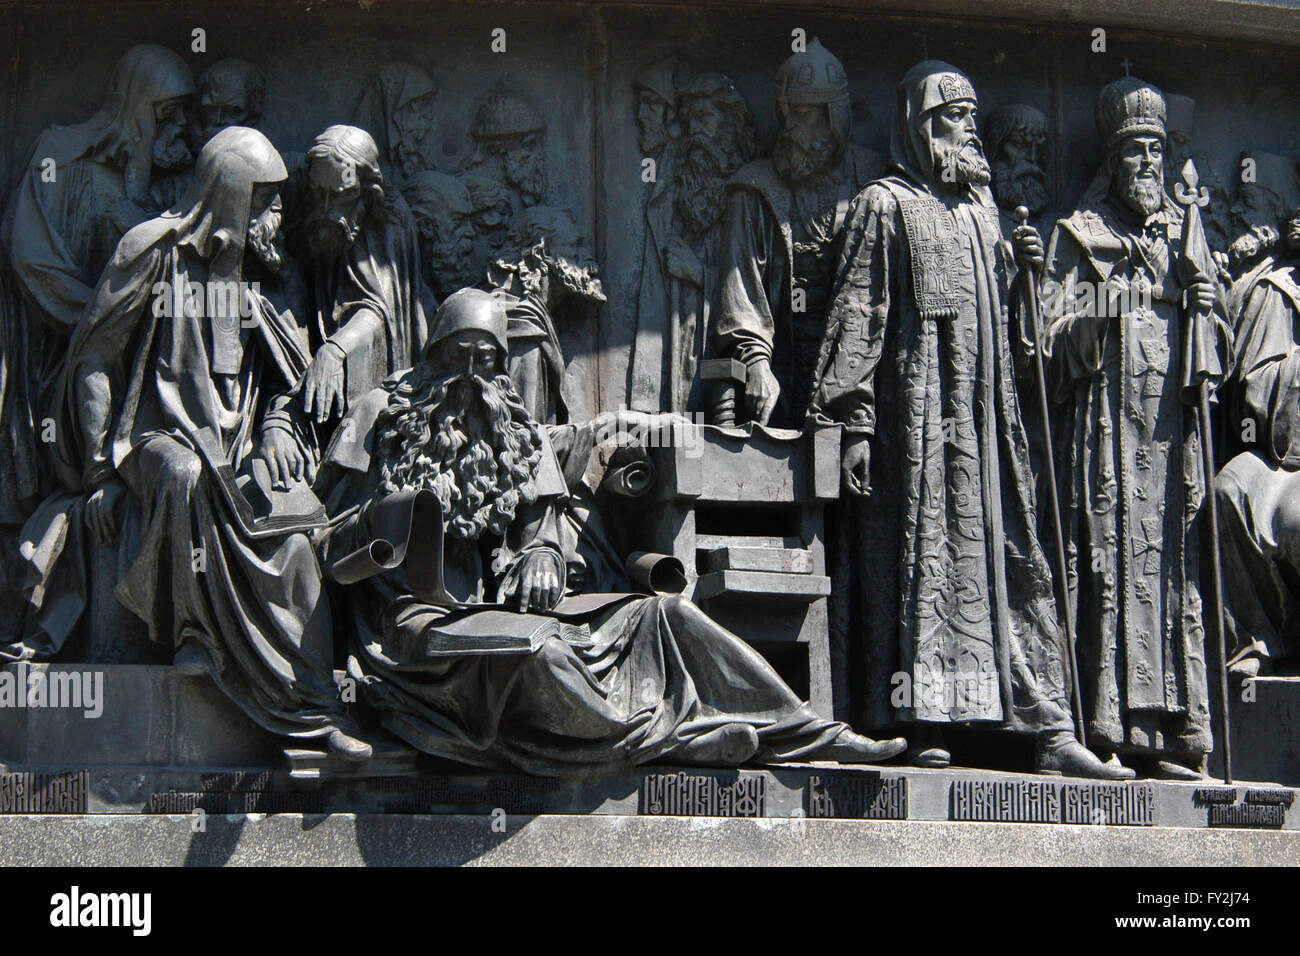 Metropolitan Alexius of Moscow, Saint Sergius of Radonezh, Maximus the Greek, Patriarch Nikon of Moscow and Saint Dimitry of Rostov depicted (from left to right in the foreground) in the bas relief dedicated to Russian men of enlightenment by Russian sculptor Matvey Chizhov. Detail of the Monument to the Millennium of Russia (1862) designed by Mikhail Mikeshin in Veliky Novgorod, Russia. Saints Cyril of Beloozero and Stephen of Perm, Metropolitan Peter Mogila of Kiev, Saints Zosima and Sabbatius of Solovki, Metropolitan Jonah of Moscow, Metropolitan Macarius of Moscow, Archbishop Guriy of Kaza Stock Photo